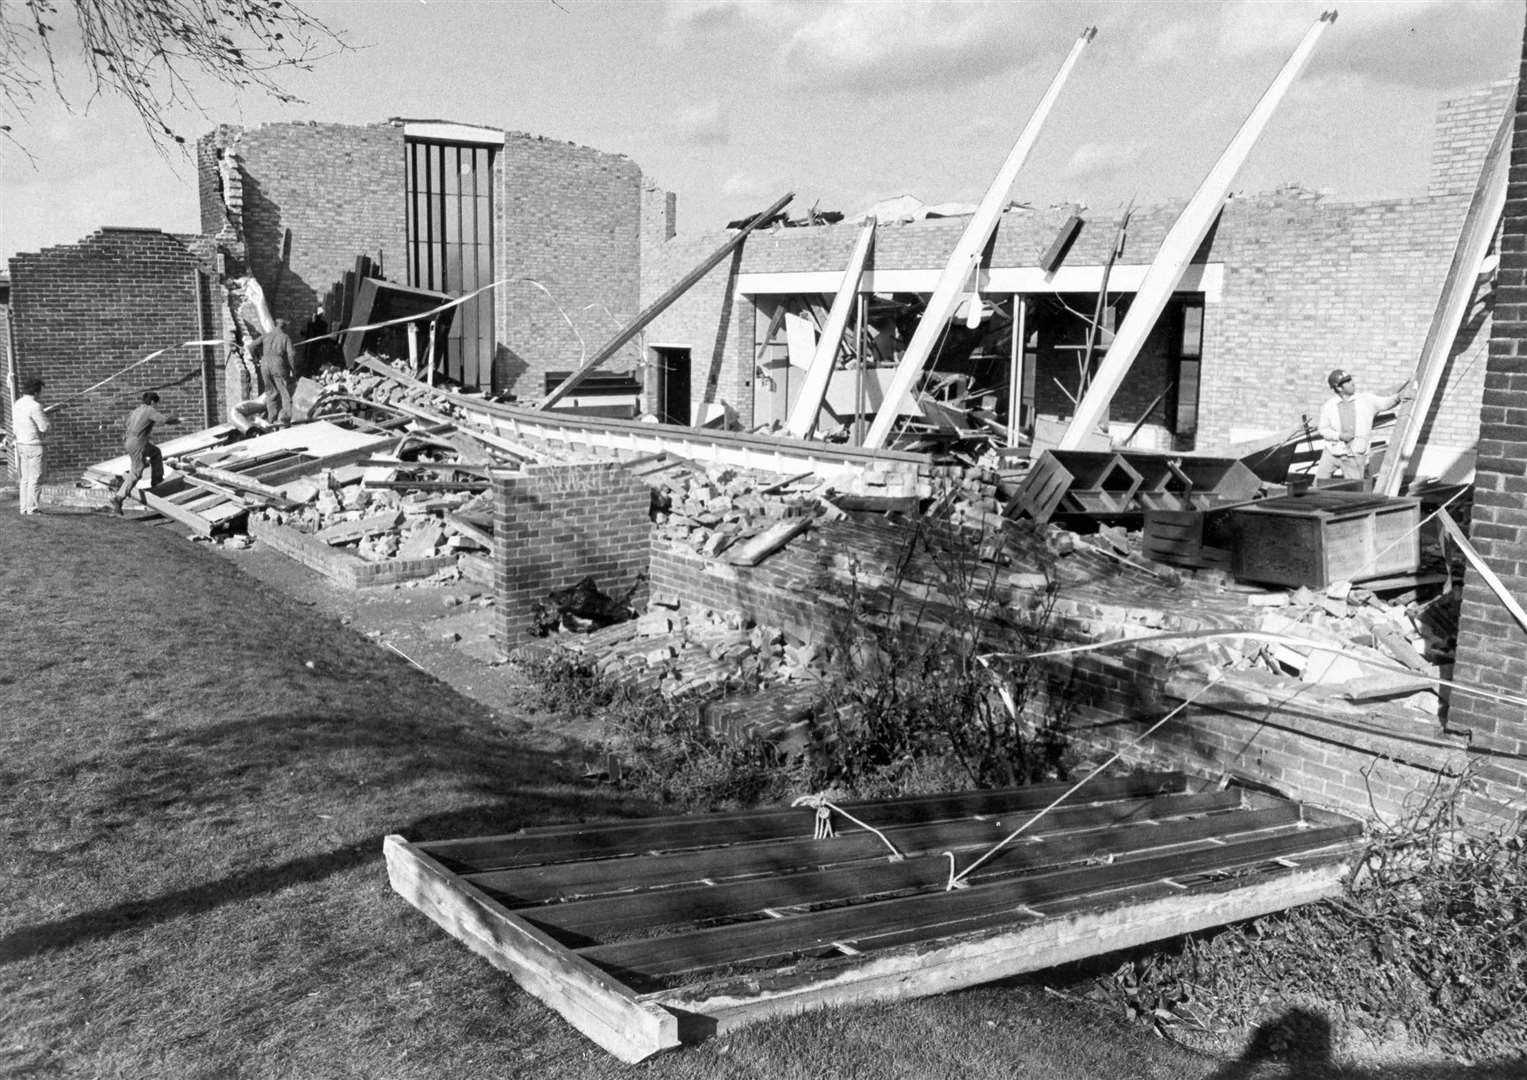 St Justus Church, Rochester, was completely flattened by the Great Storm of 1987